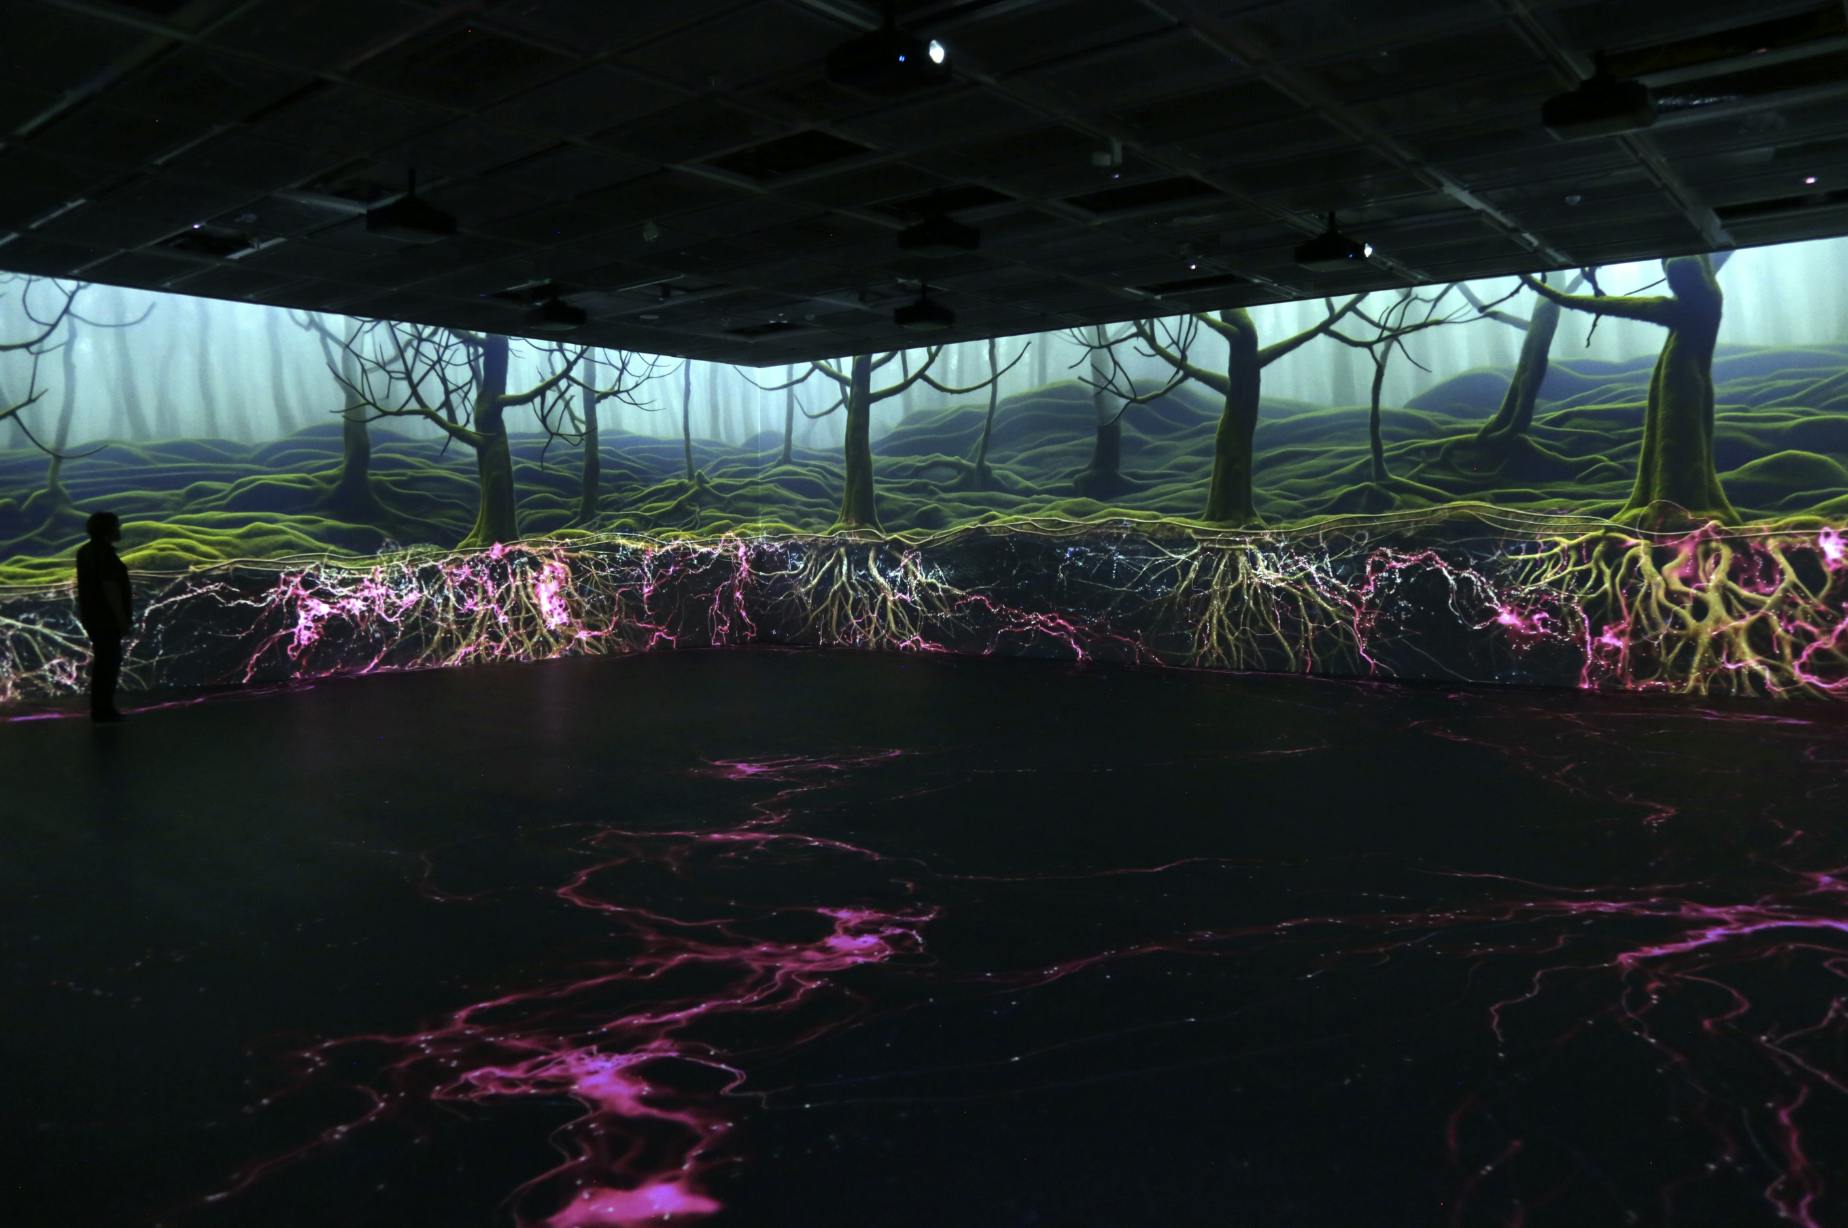 A photo of Entanglement by Artificial Nature. This photo shows a large dark room with an AI generated forest on two walls. A purple fungal network is integrated with the tree root system and expands out onto the floor.